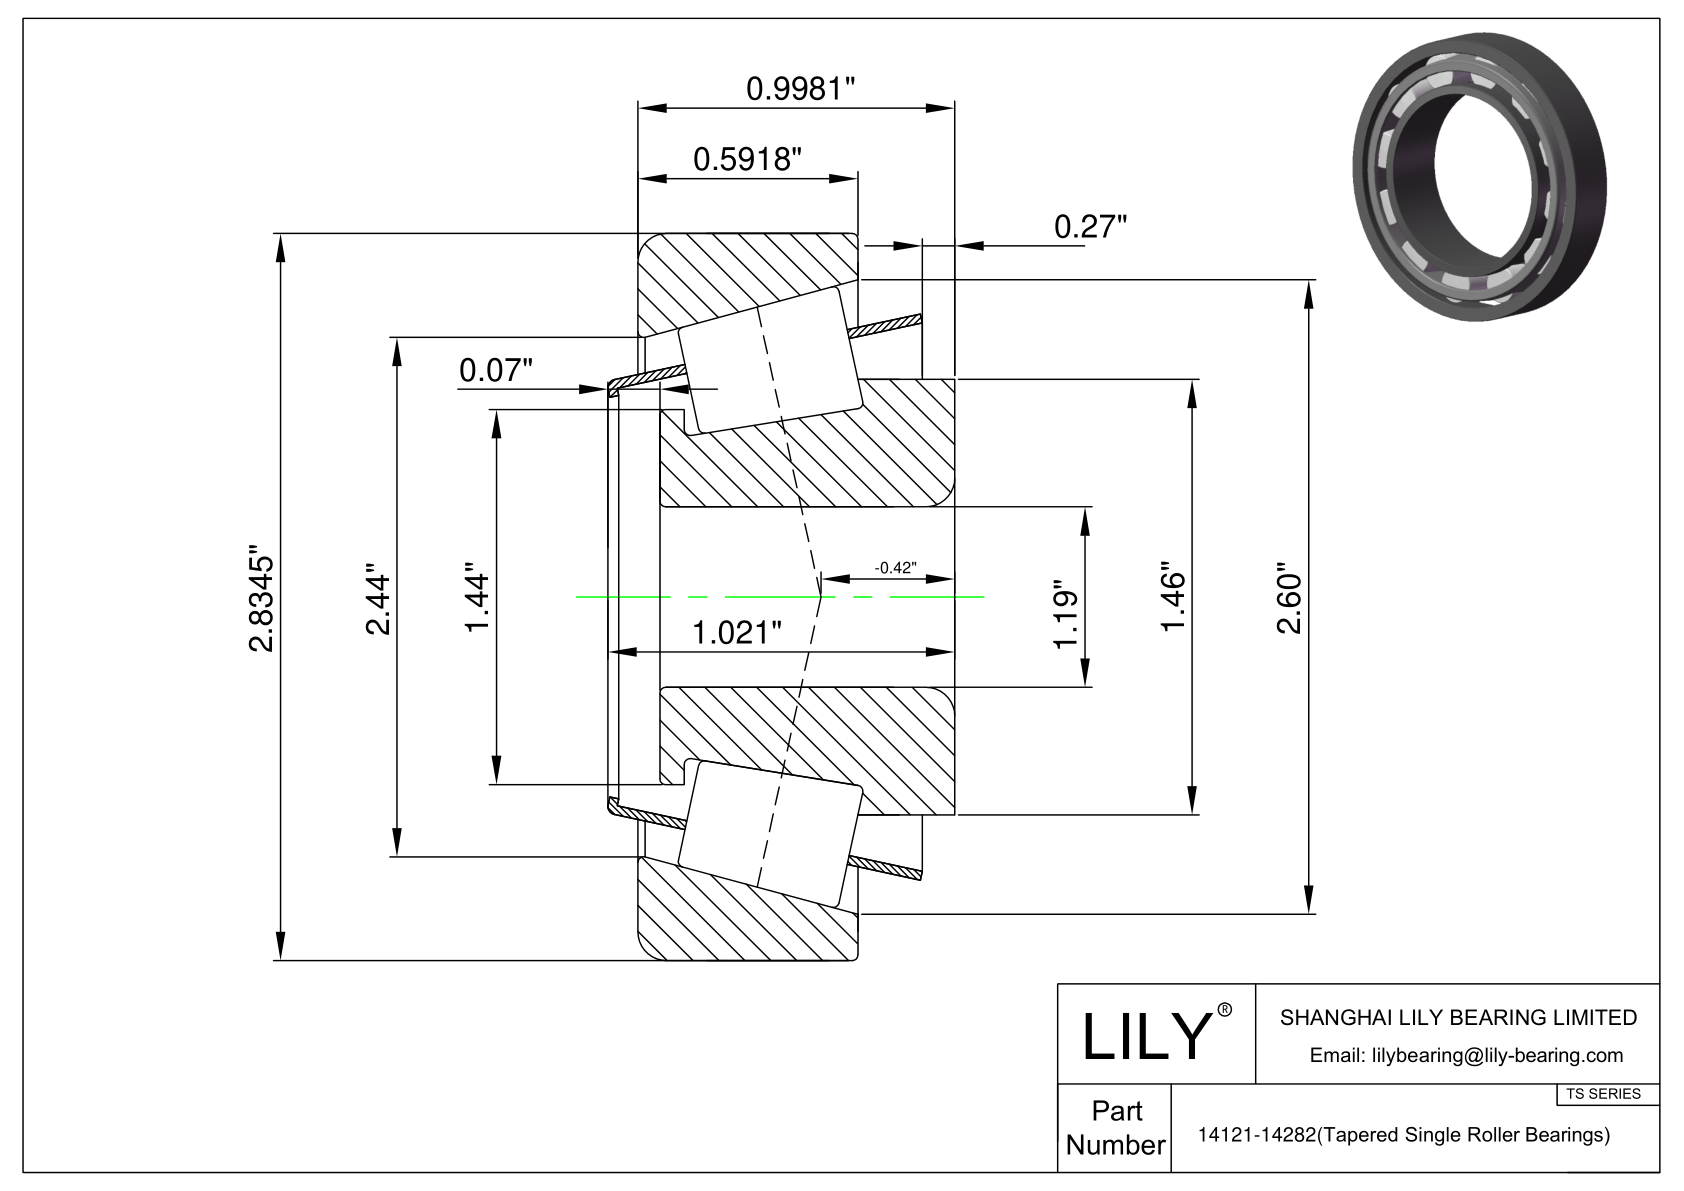 14121-14282 TS (Tapered Single Roller Bearings) (Imperial) cad drawing